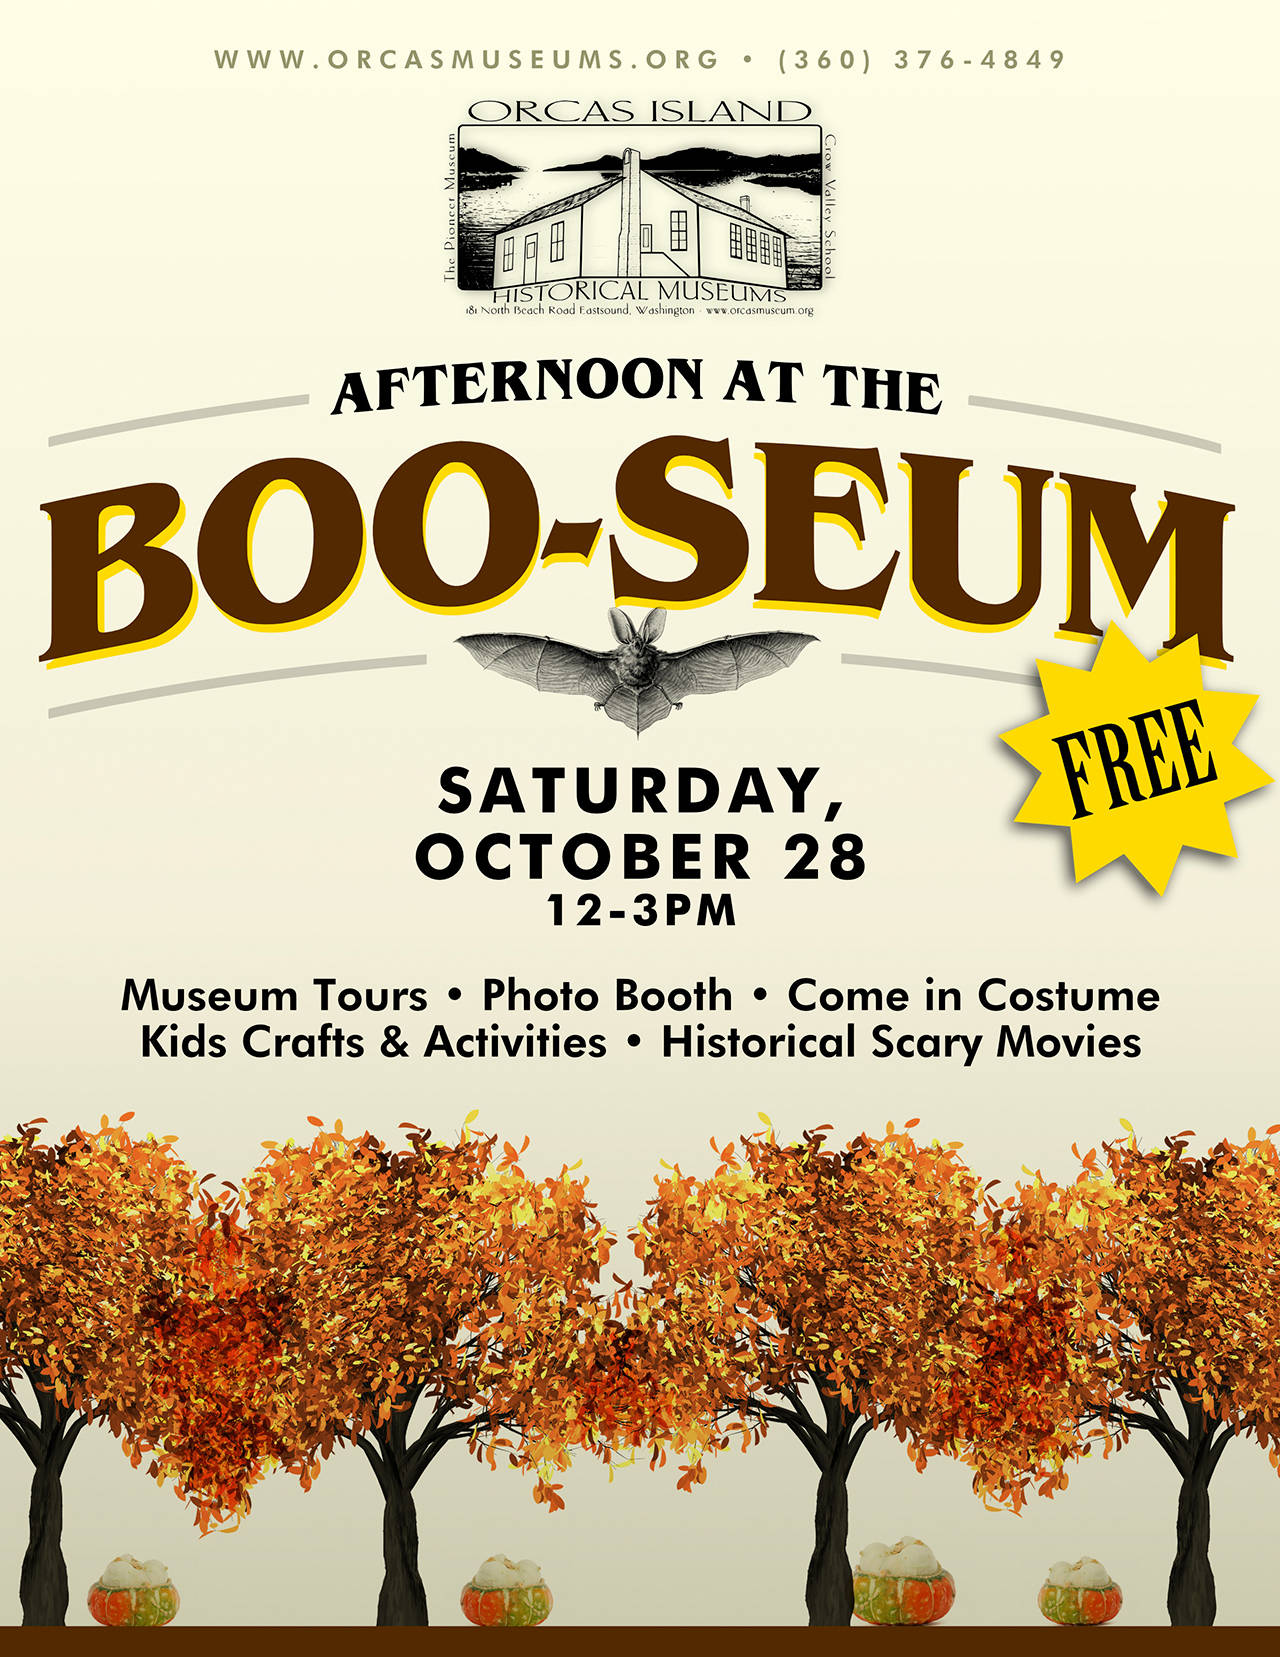 Free ‘Boo-seum’ events at historical museum